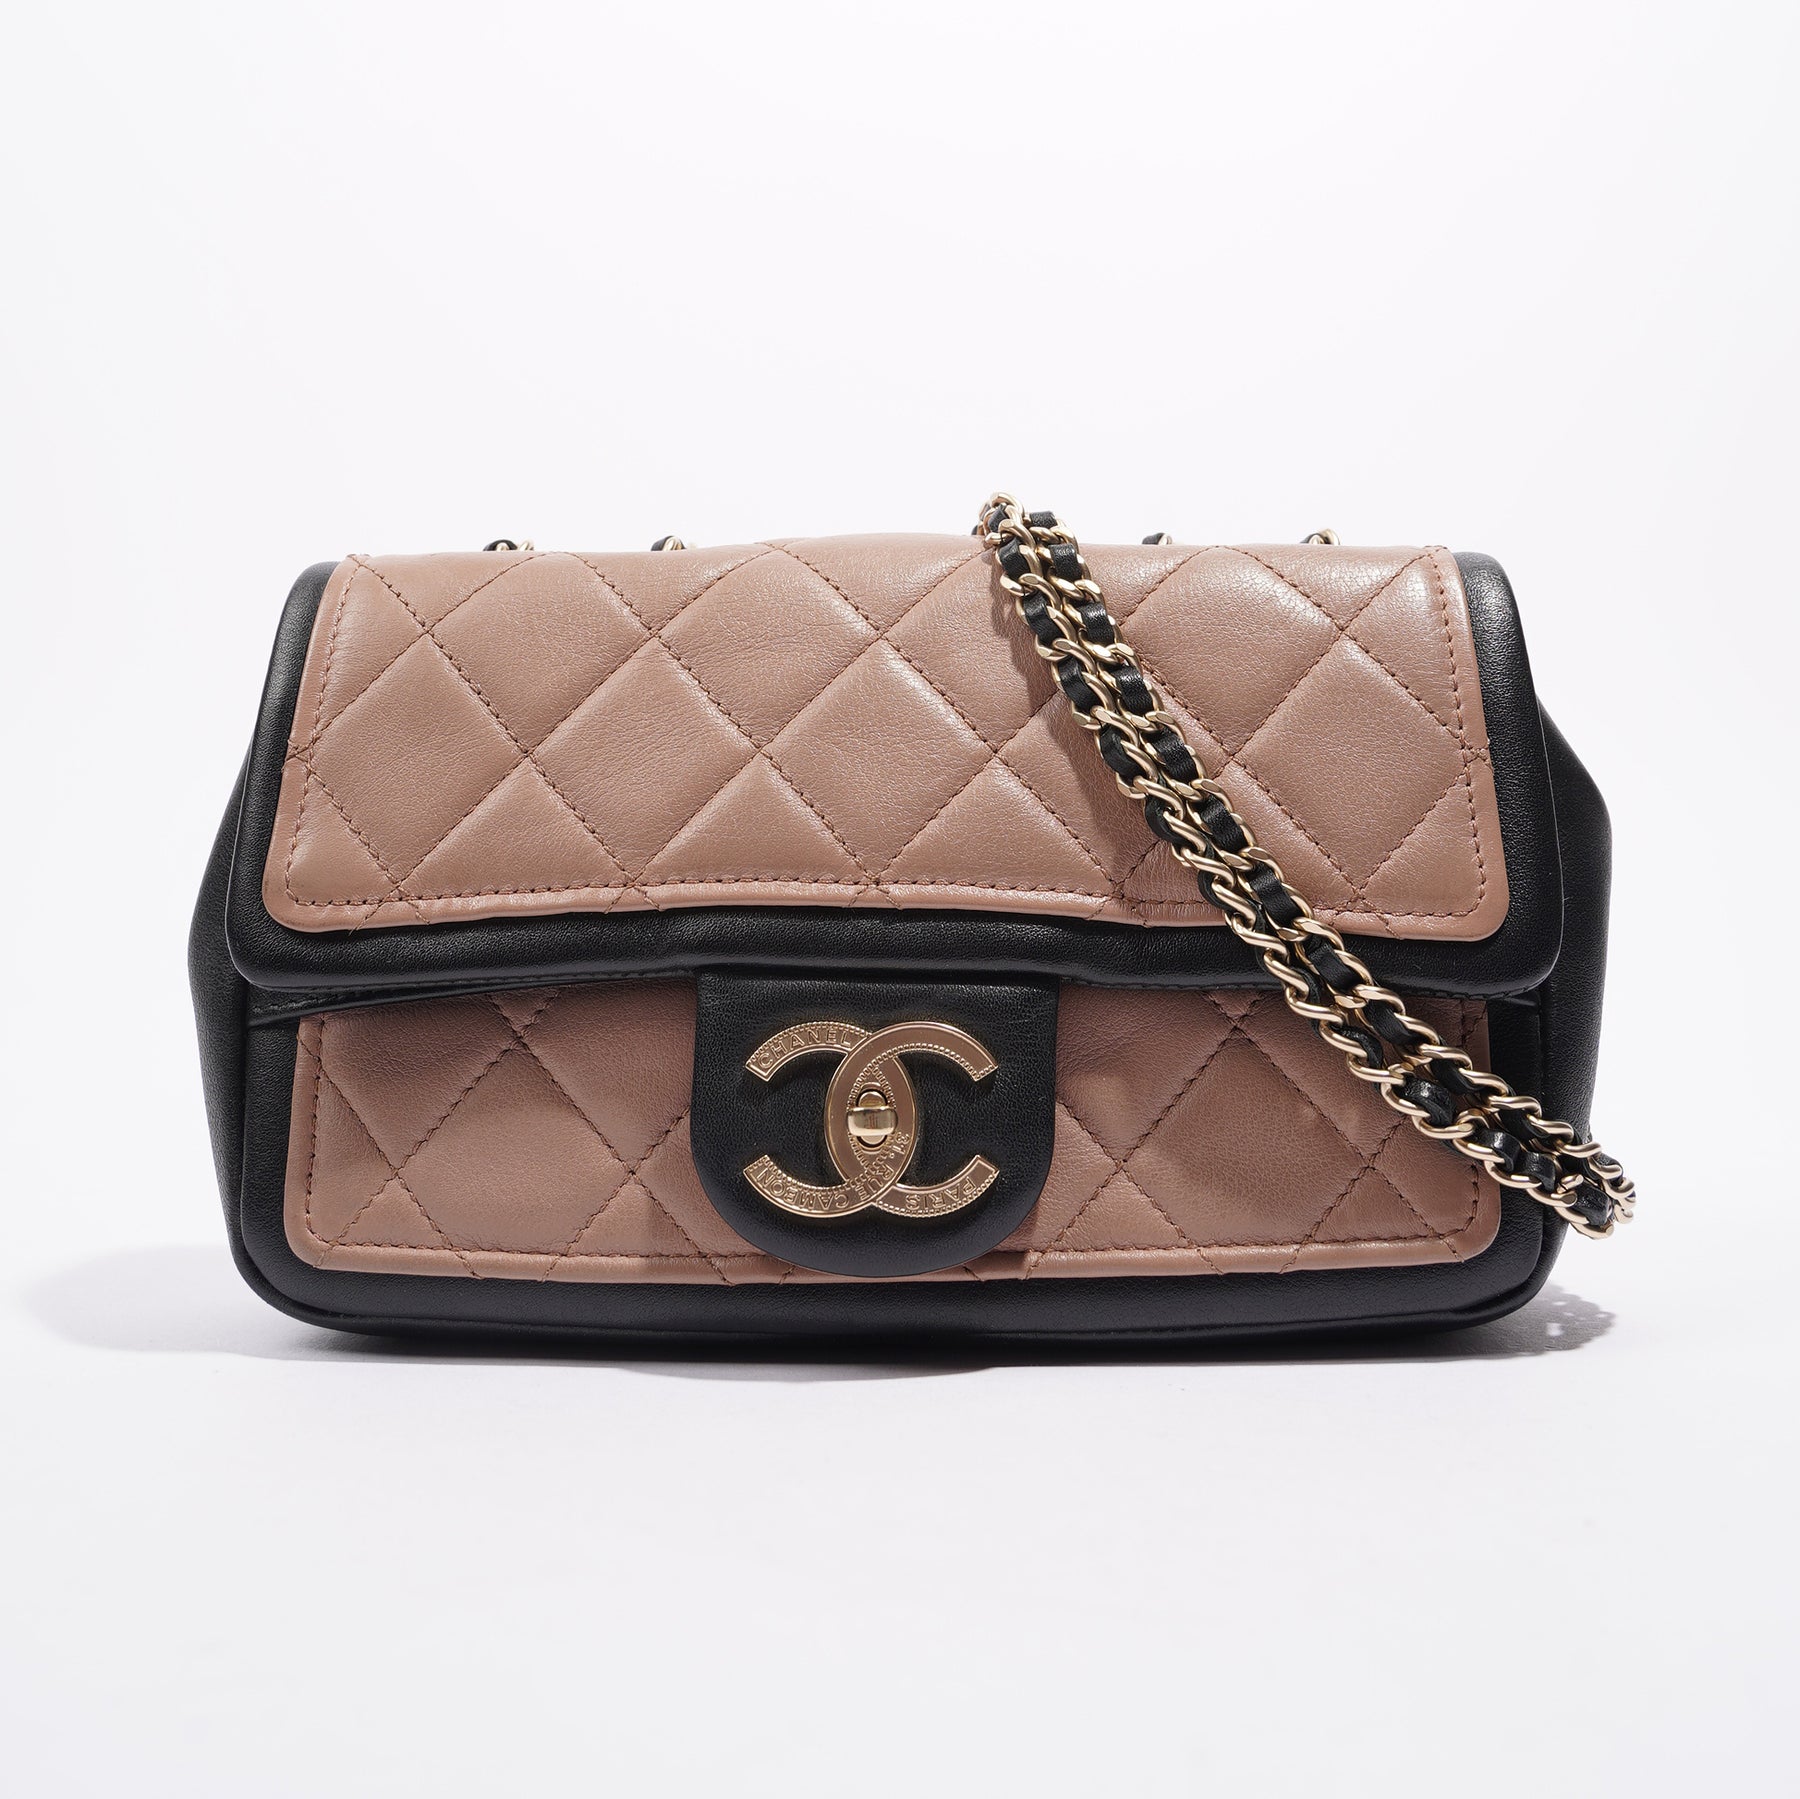 Chanel C-17 Chanel 8 FLap Black Quilted Leather Mini Hand Bag